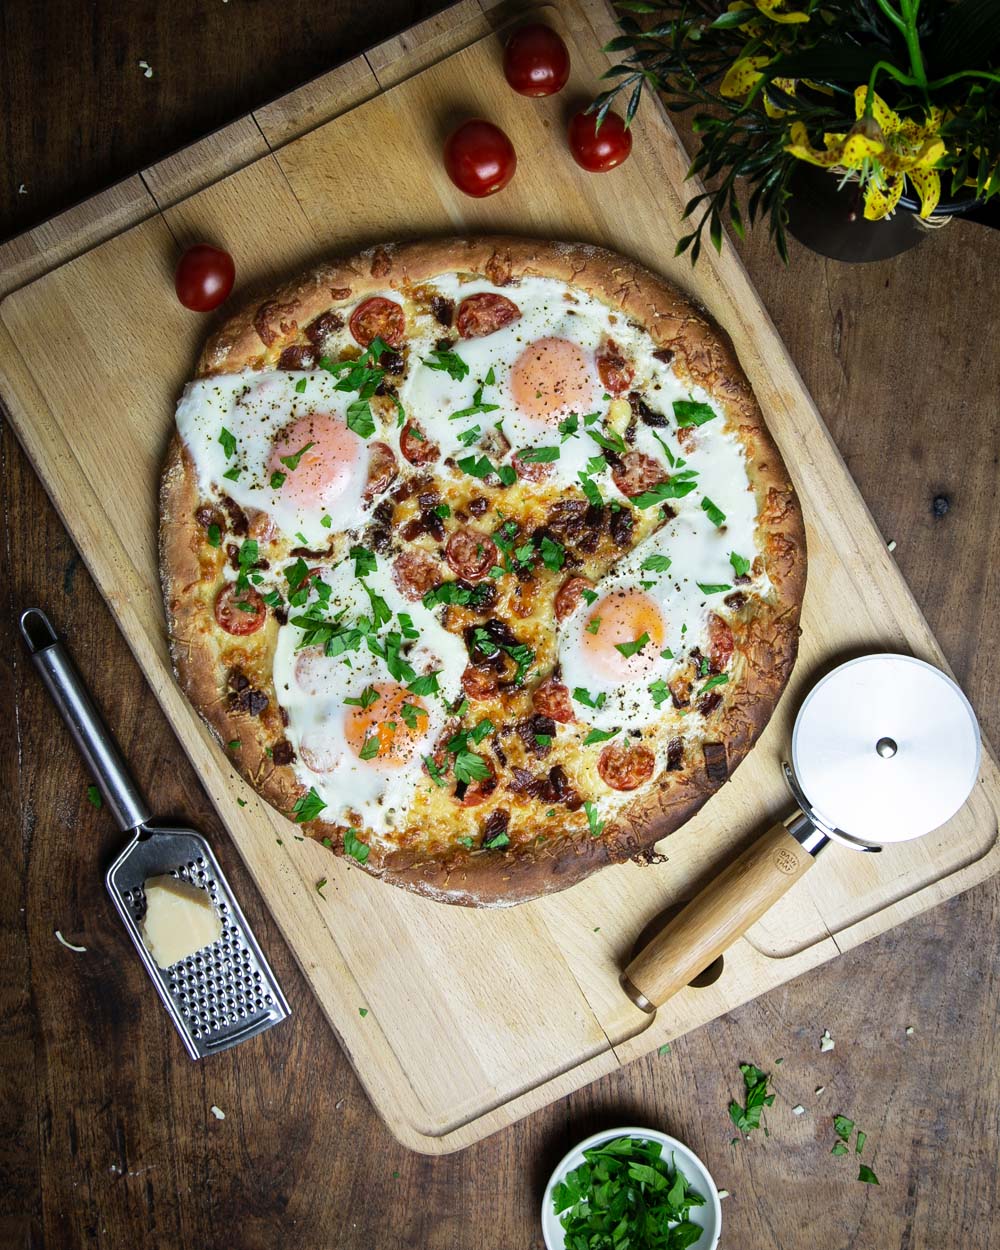 Top view of the classic breakfast pizza with sunny side up eggs on a wooden cutting board.